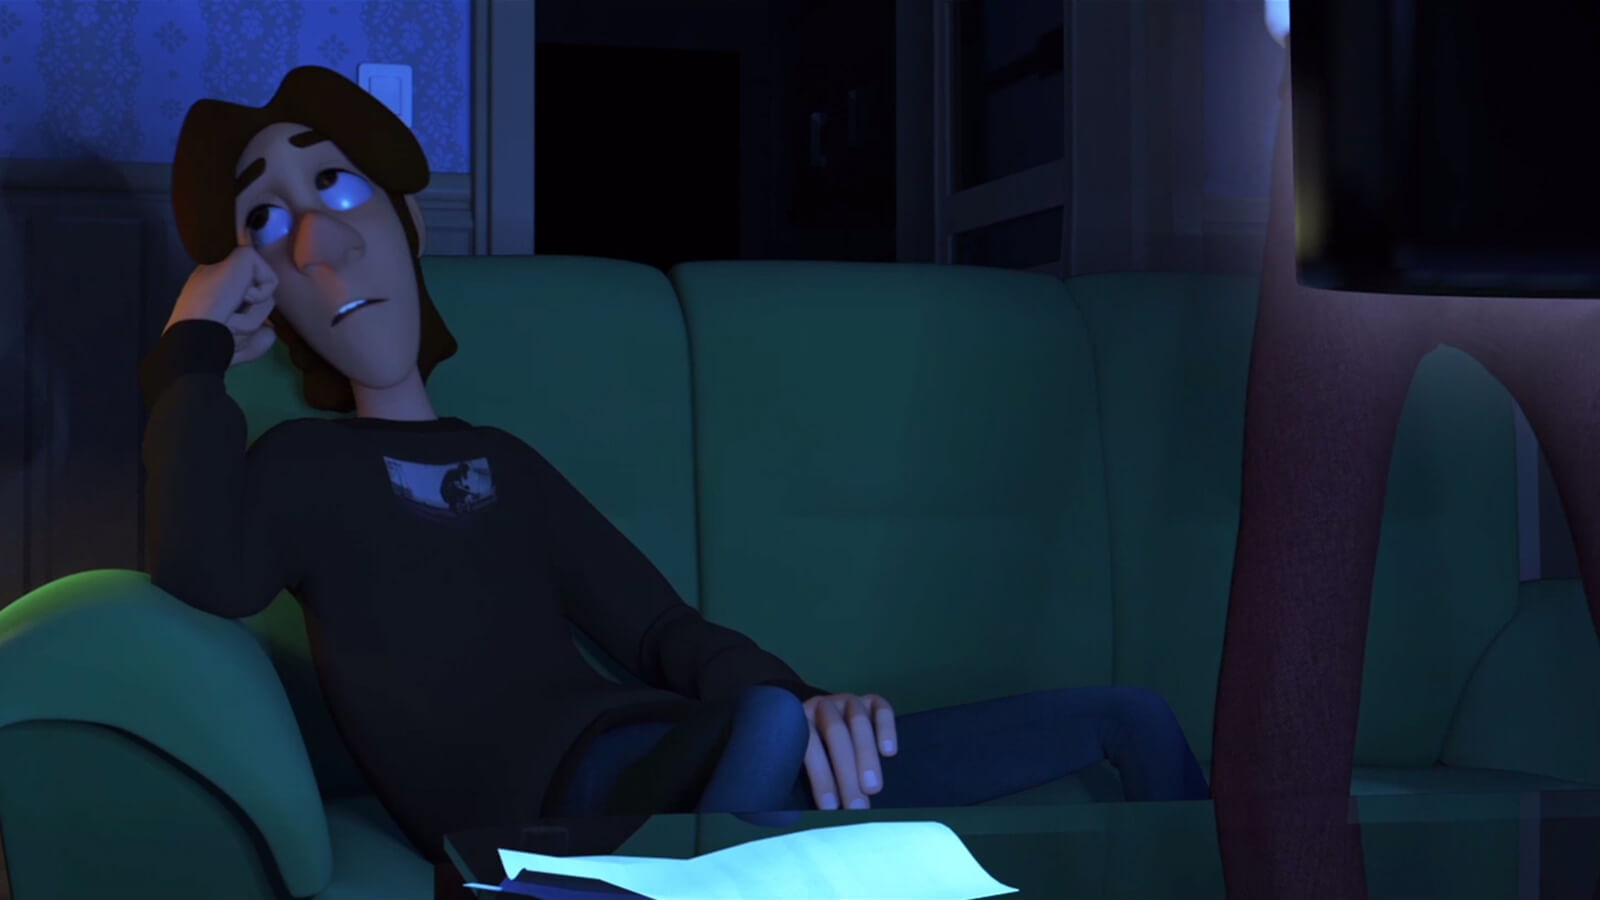 A teenage boy in a black sweater rolls his eyes, sitting on a green couch in a dimly lit room